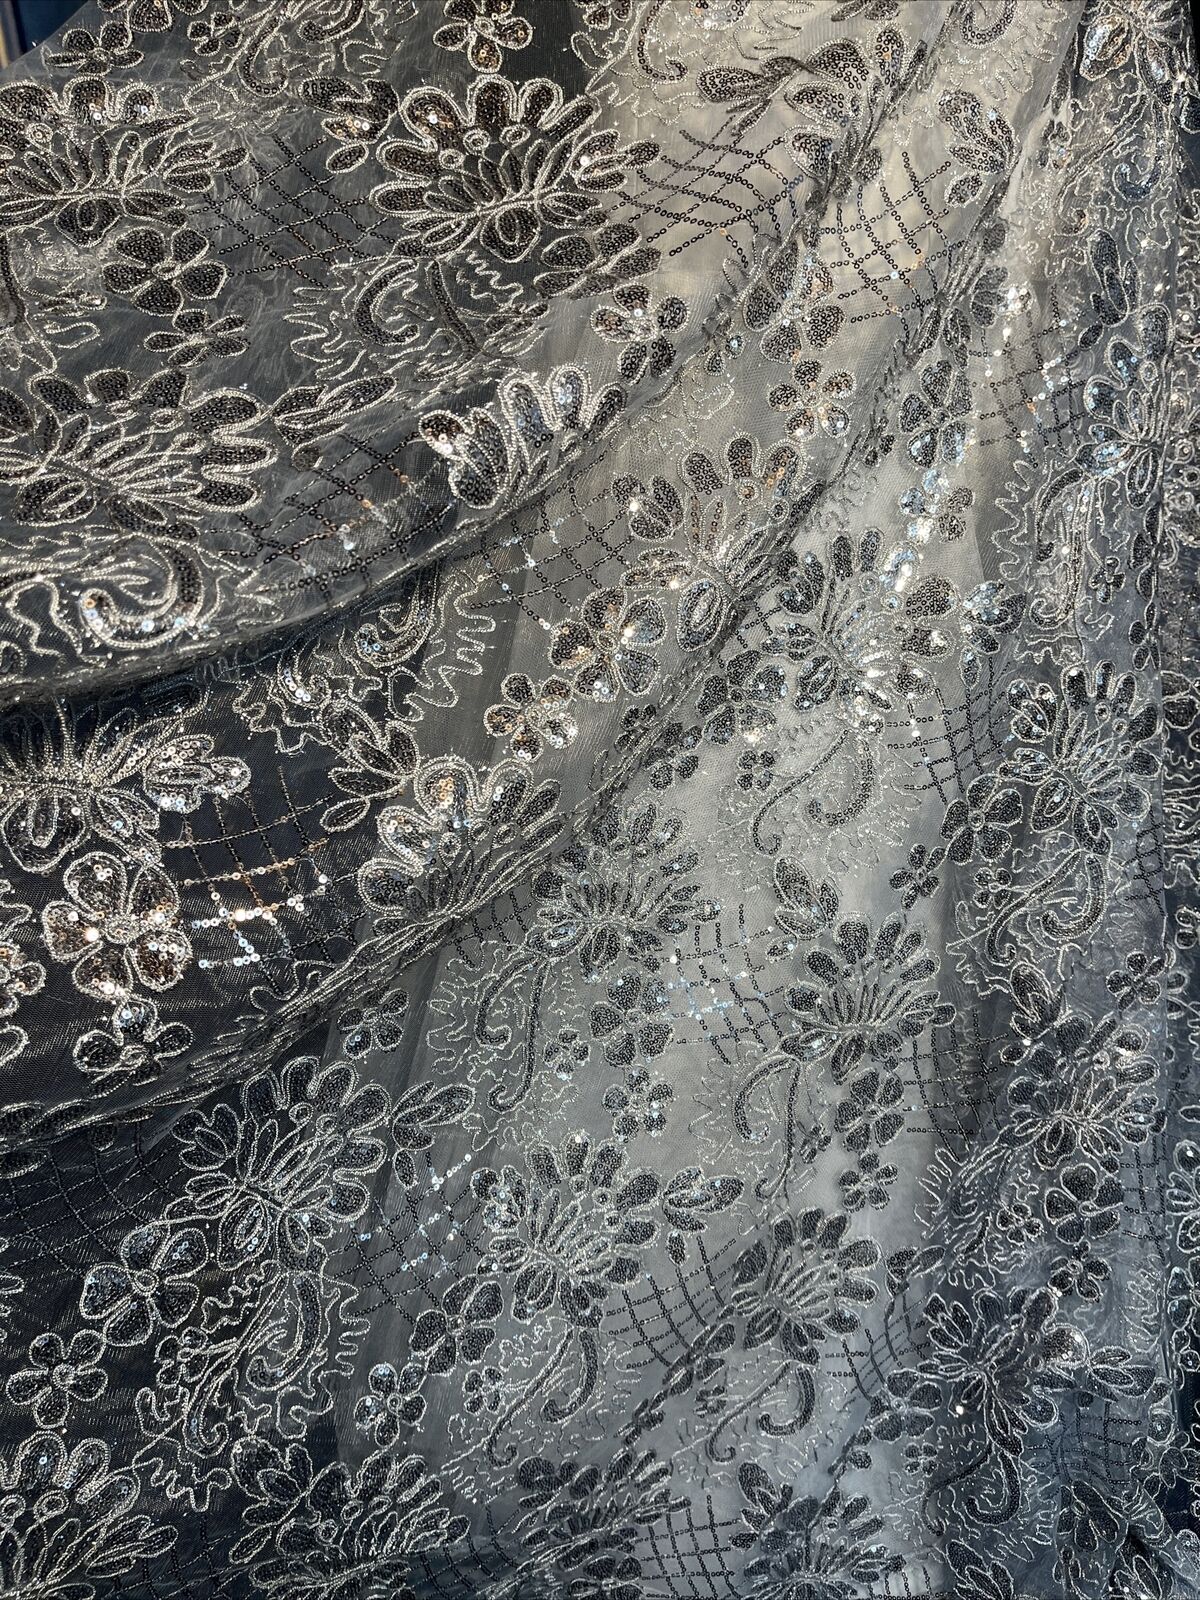 Silver Wedding Sparkly Embroidered Lace with Sequins